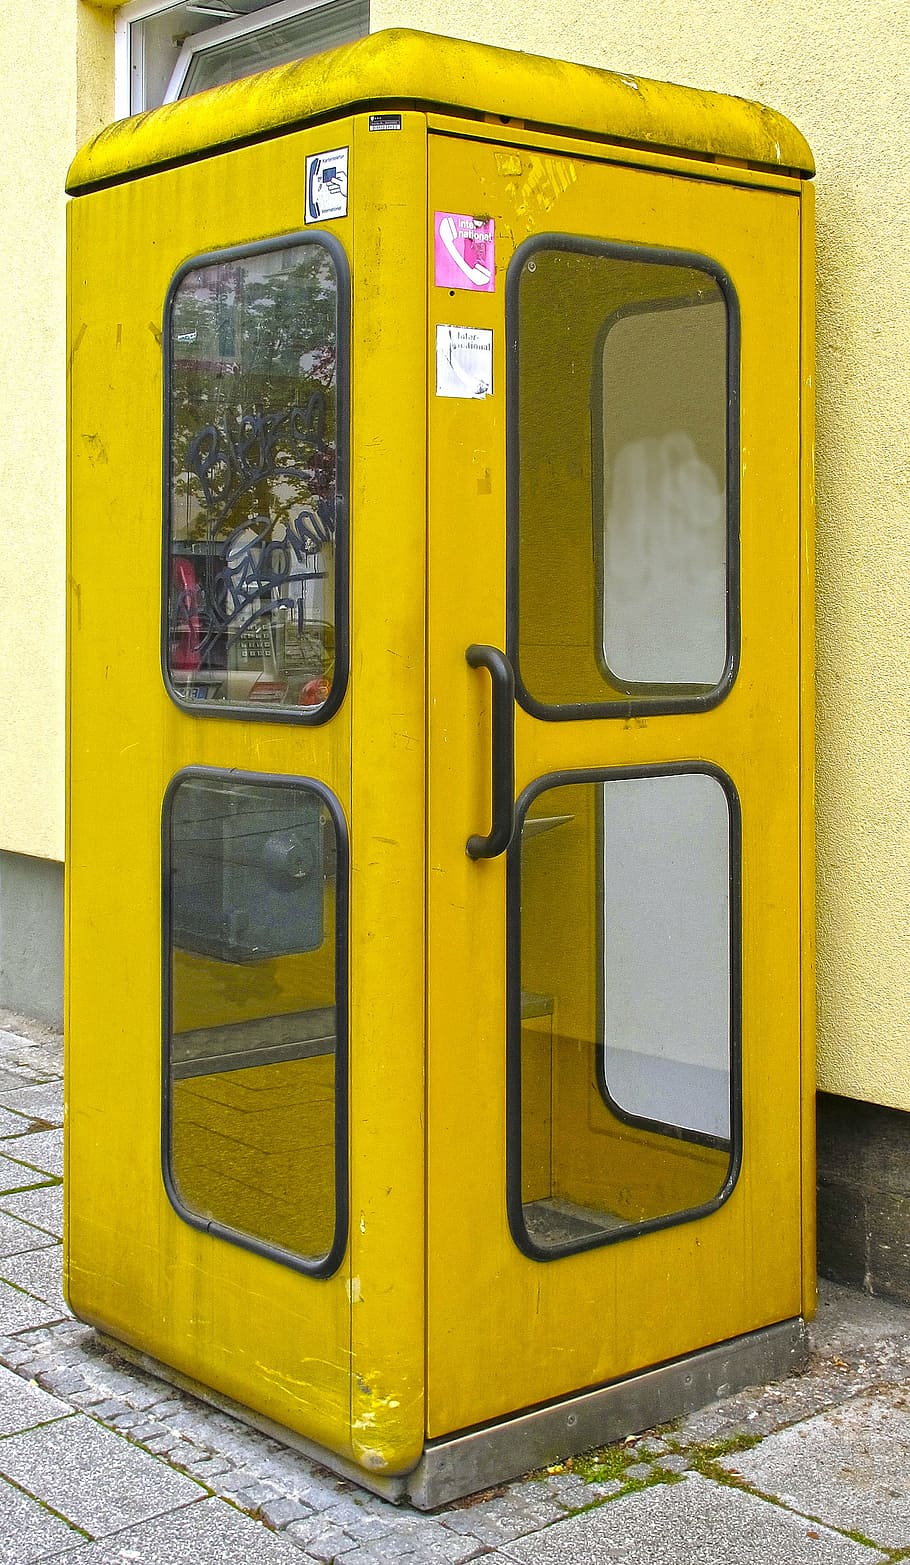 phone booth, yellow, antiquated, post, telephone house, telekom, historically, payphone, old, architecture